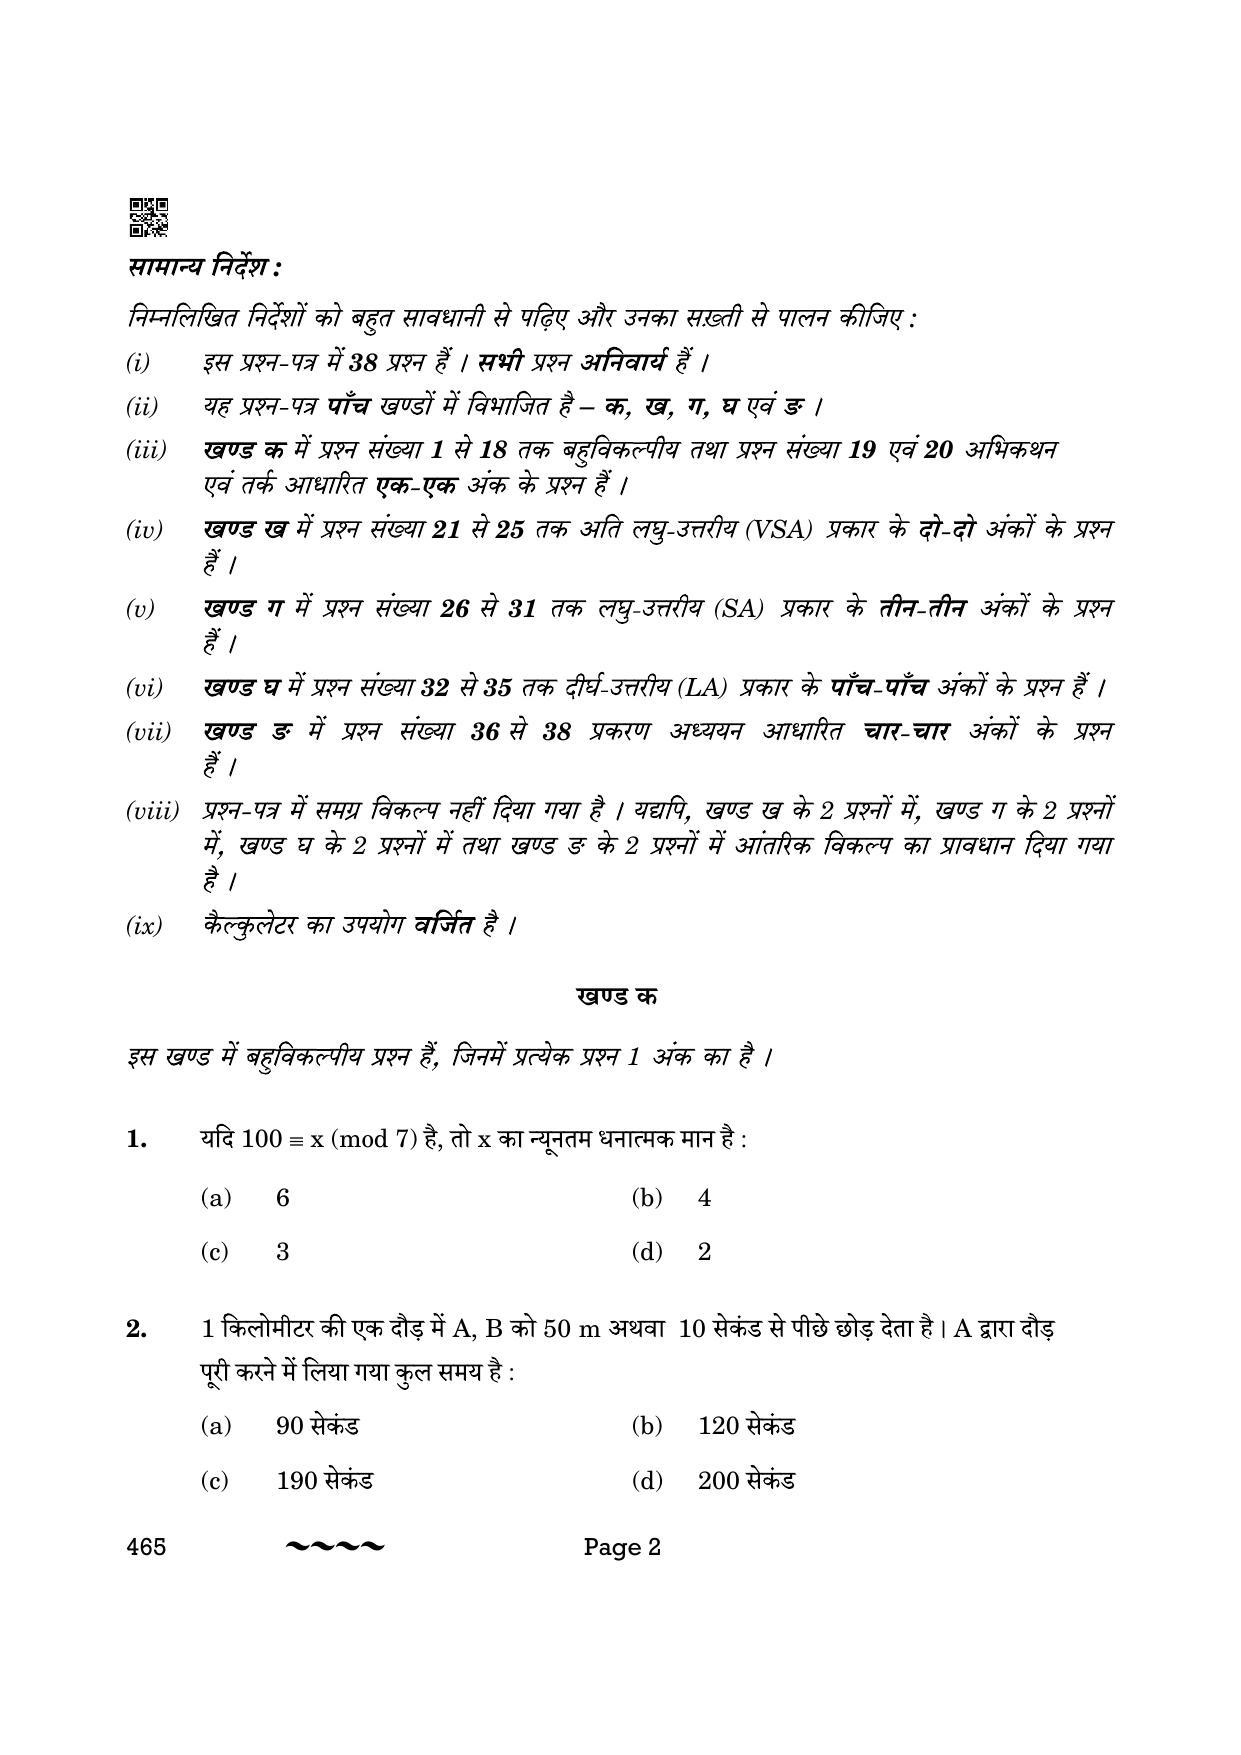 CBSE Class 12 465- Applied Mathematics 2023 (Compartment) Question Paper - Page 2